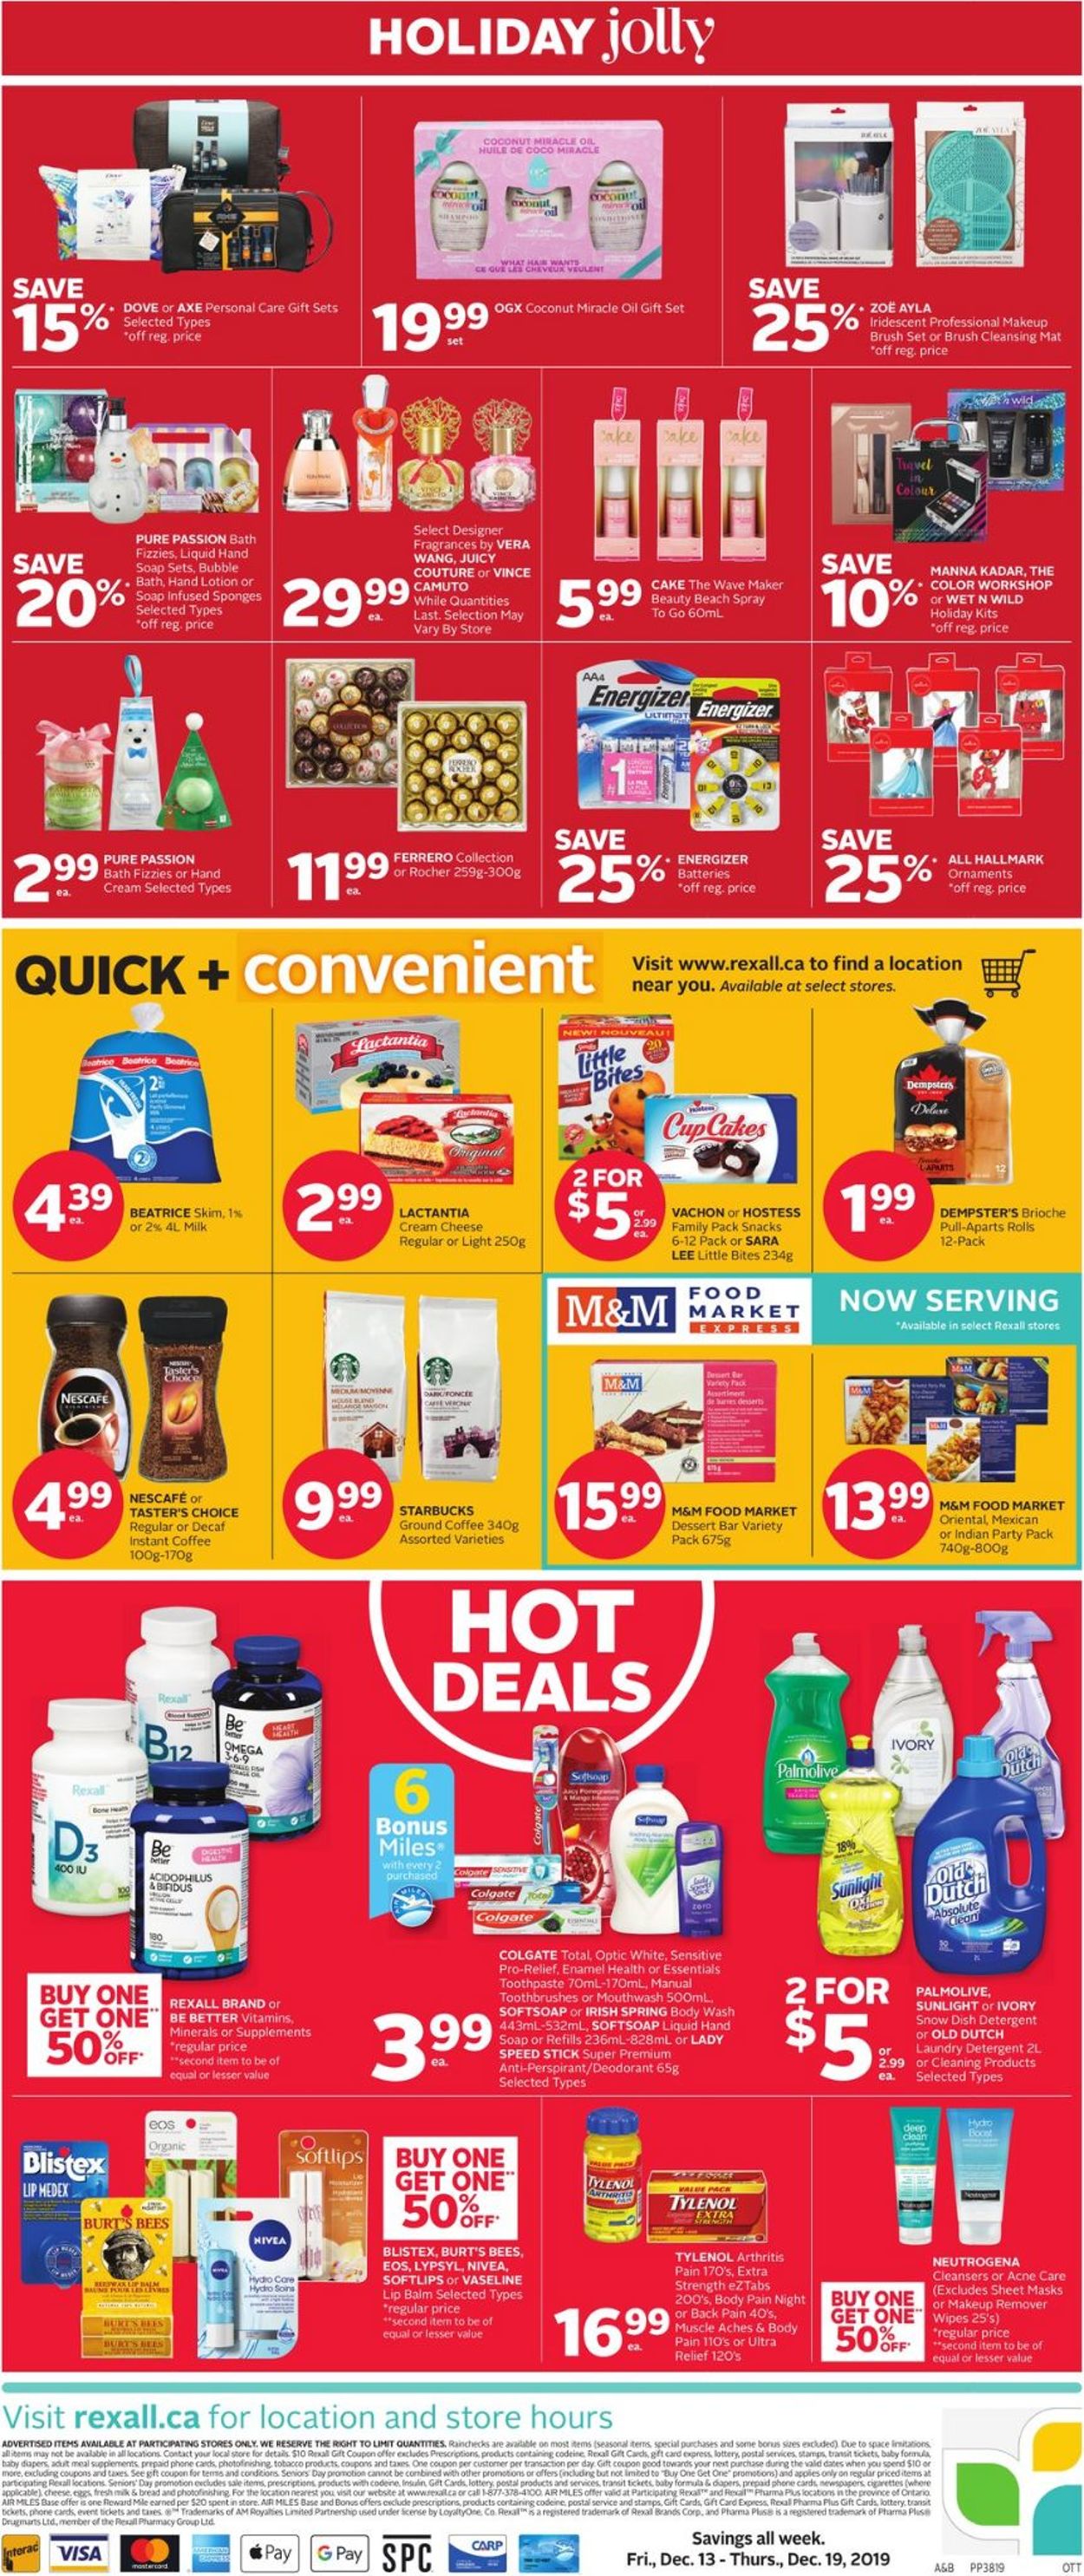 Rexall - HOLIDAY Flyer 2019 Flyer - 12/13-12/19/2019 (Page 2)